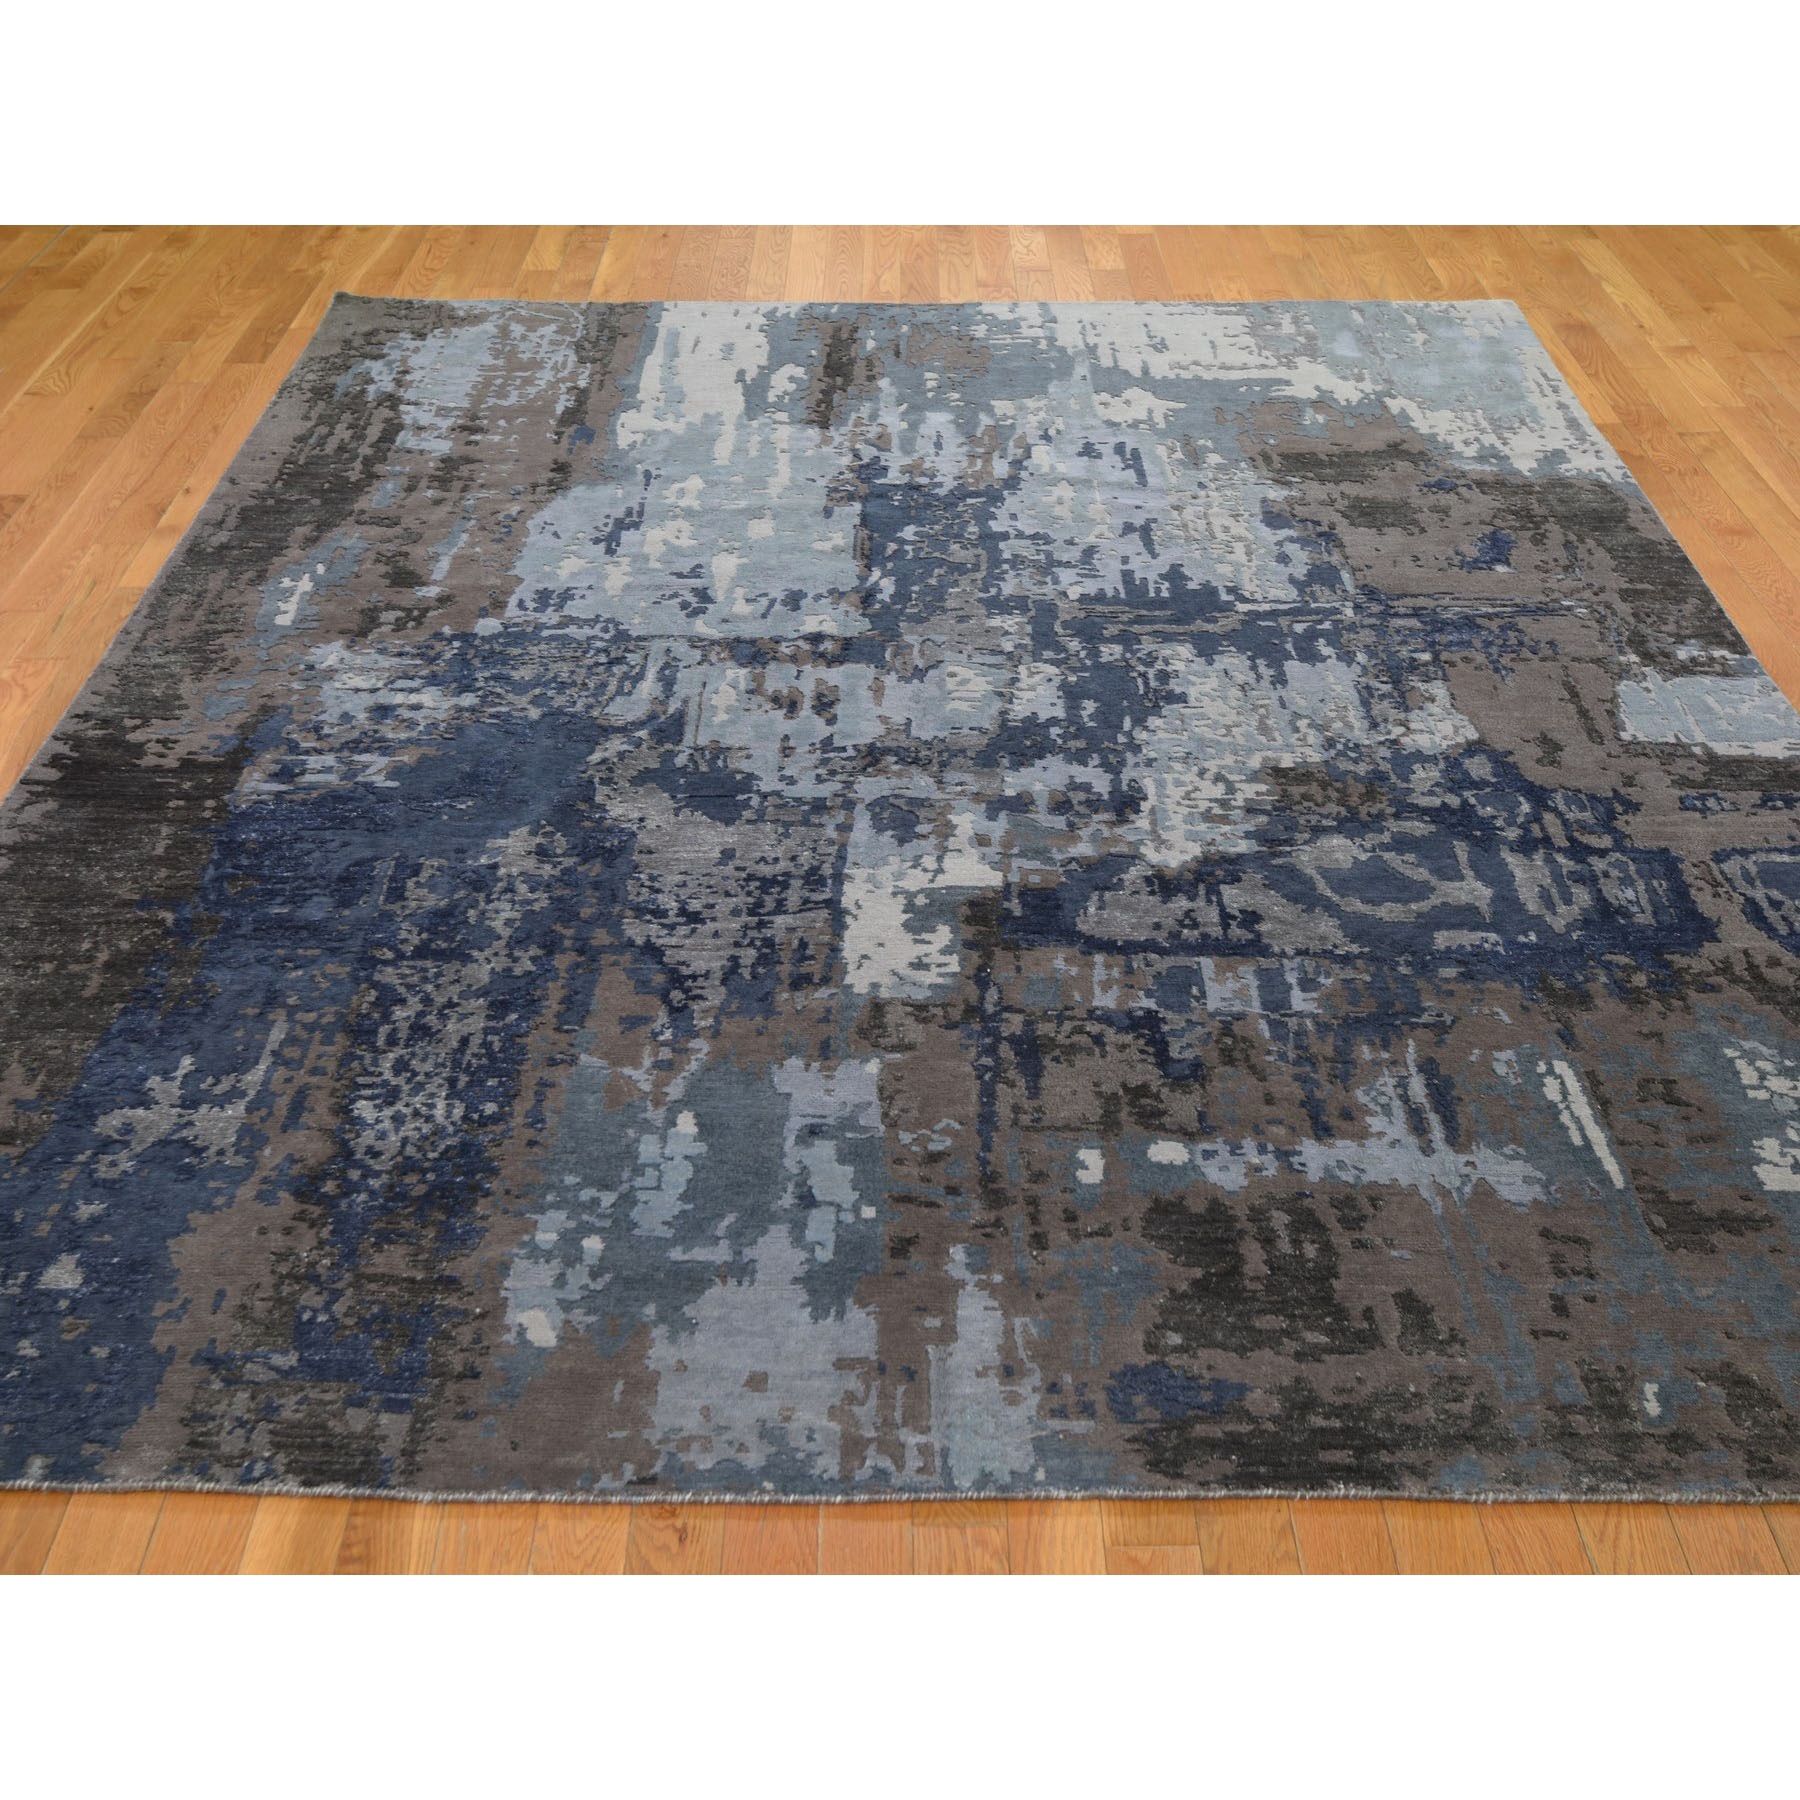 8'x10'4" Blue Abstract Design Wool and Silk Hand Woven Oriental Rug 